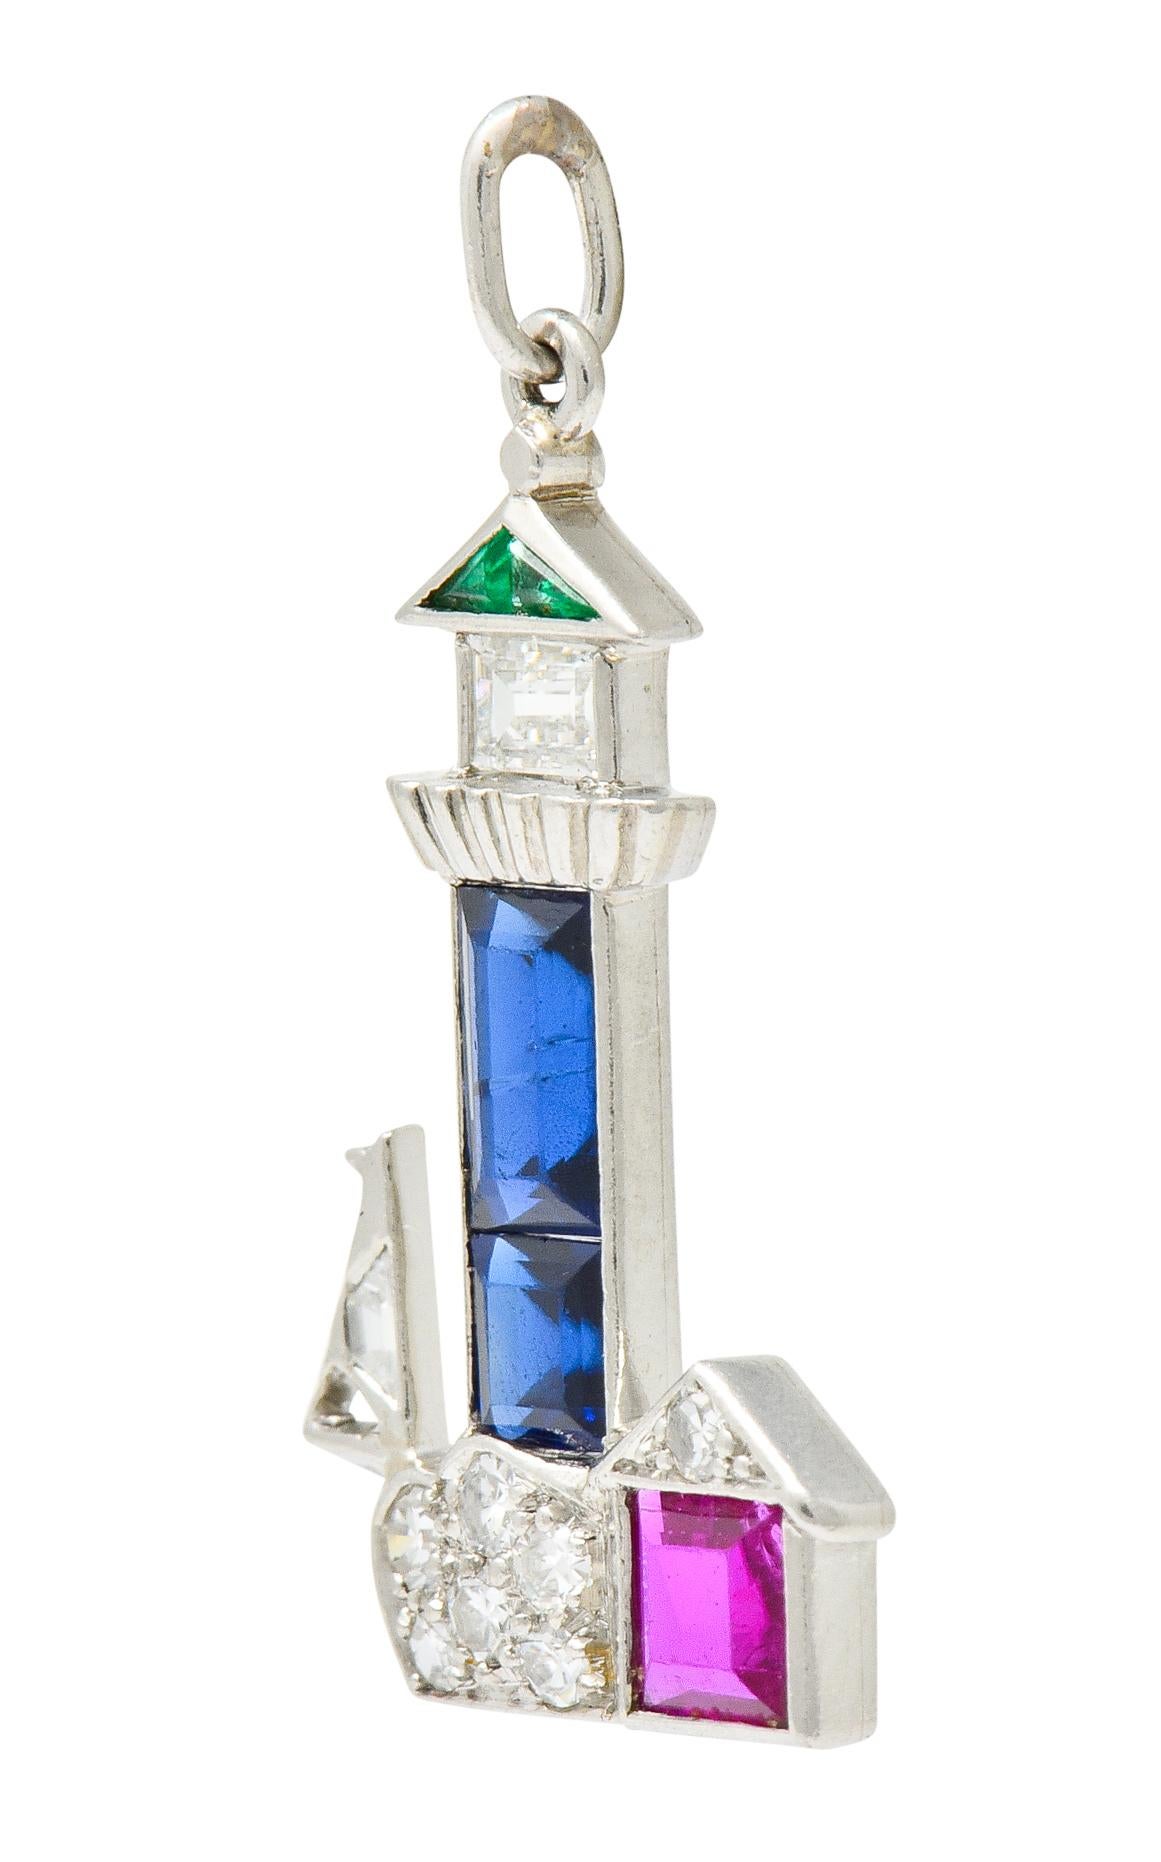 Charm designed as a lighthouse towering over a small cottage with a sailboat off the coast in the distance

Lighthouse is comprised of channel set sapphire, royal blue in color, topped by a ridged walkway and a bezel set baguette cut diamond with a